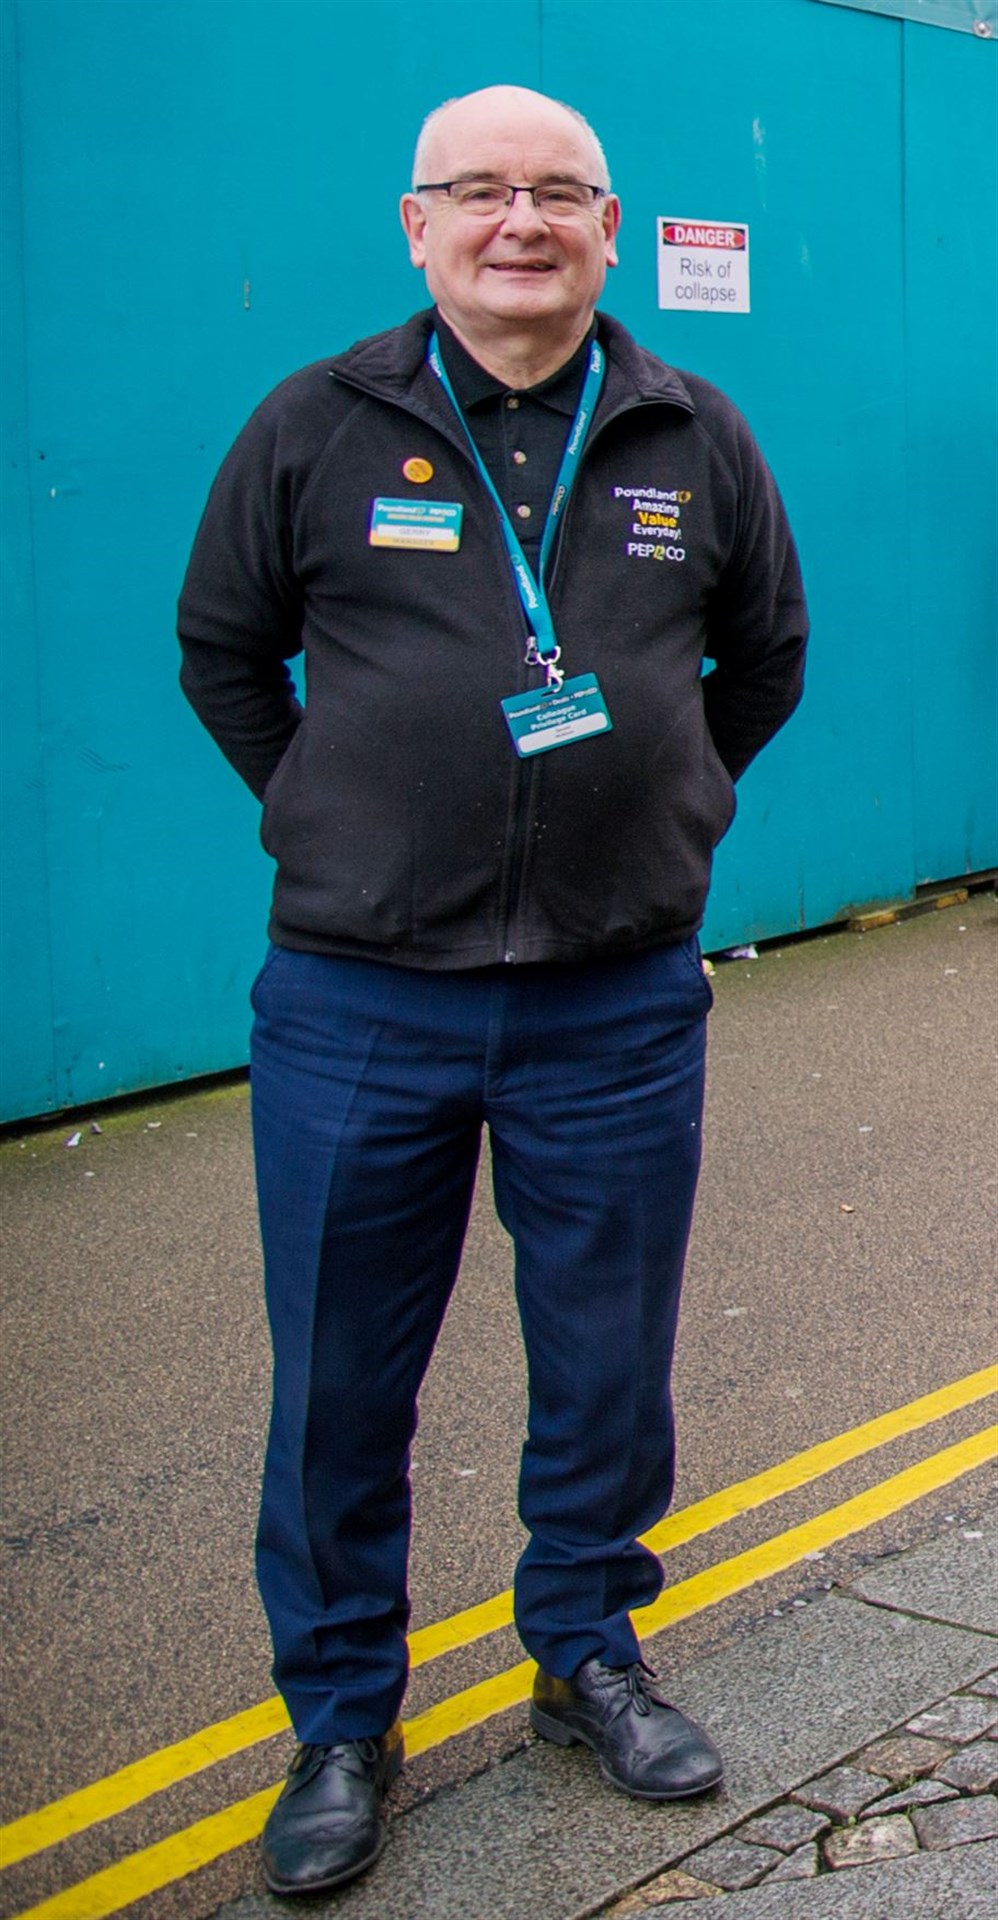 Poundland store manager Gerry McAloon.